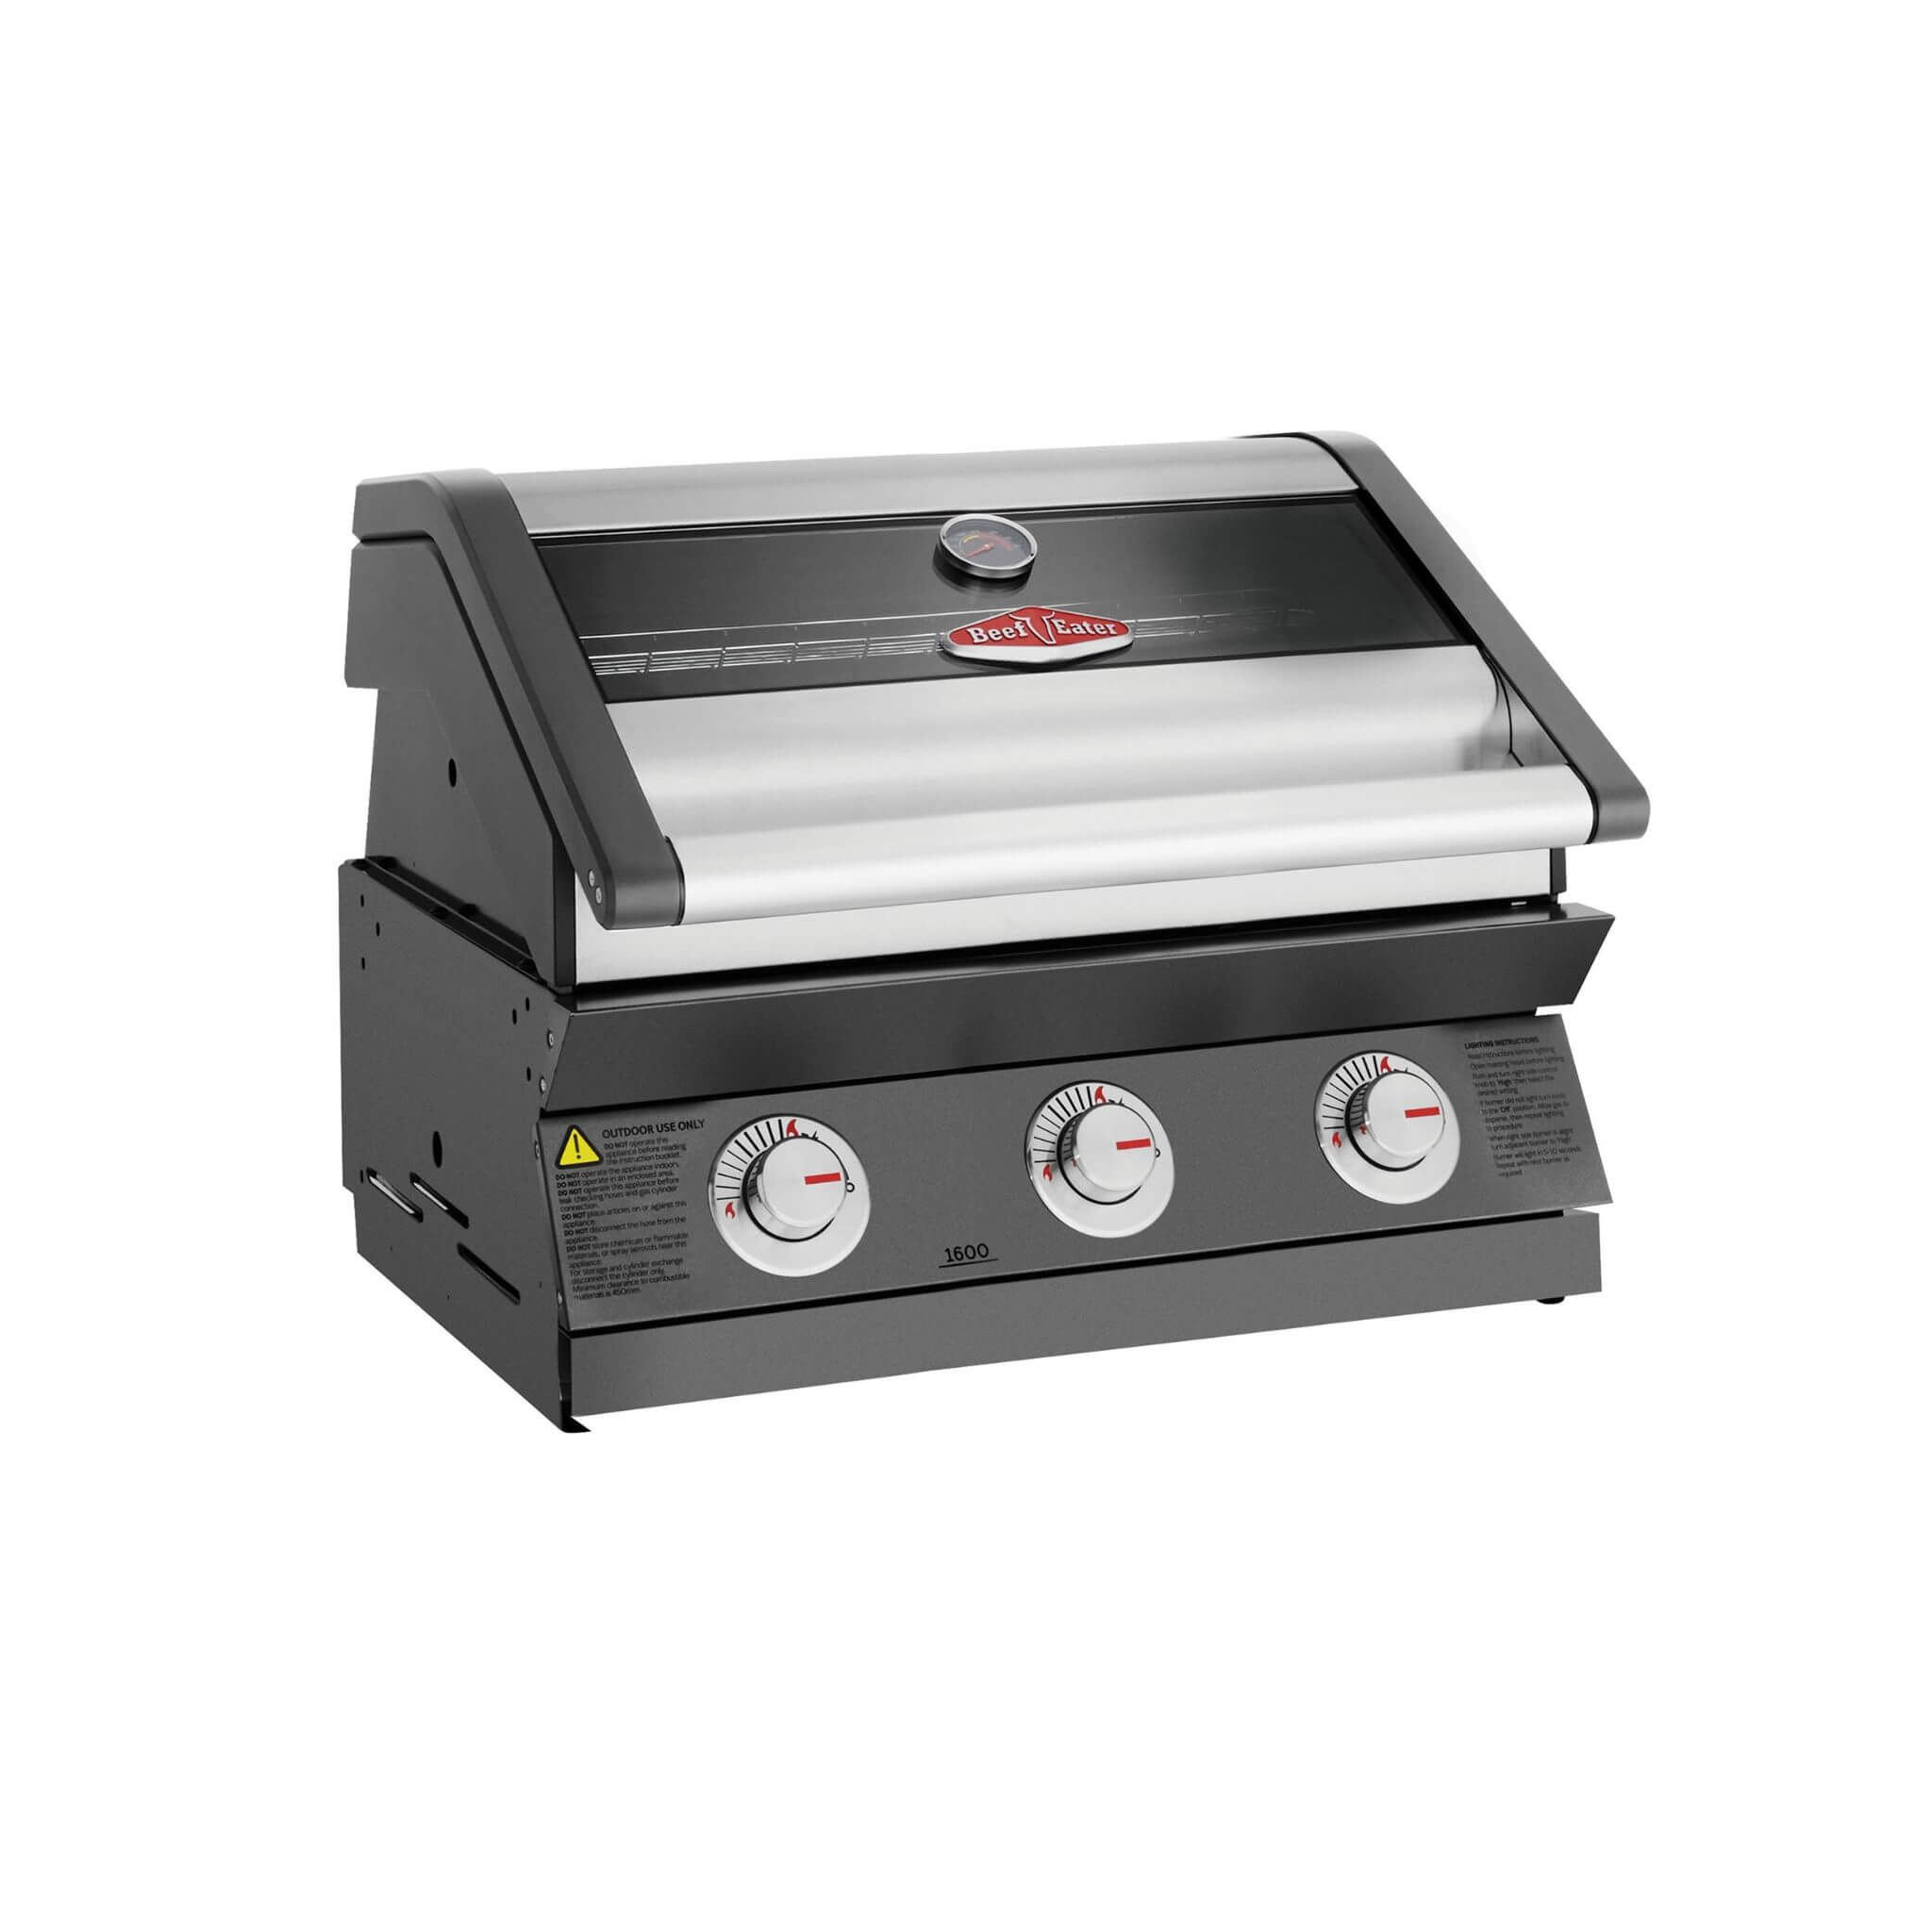 BeefEater Discovery 1600 Series - 3 Burner Built In Gas BBQ (Dark Grey Enamel or Stainless Steel)